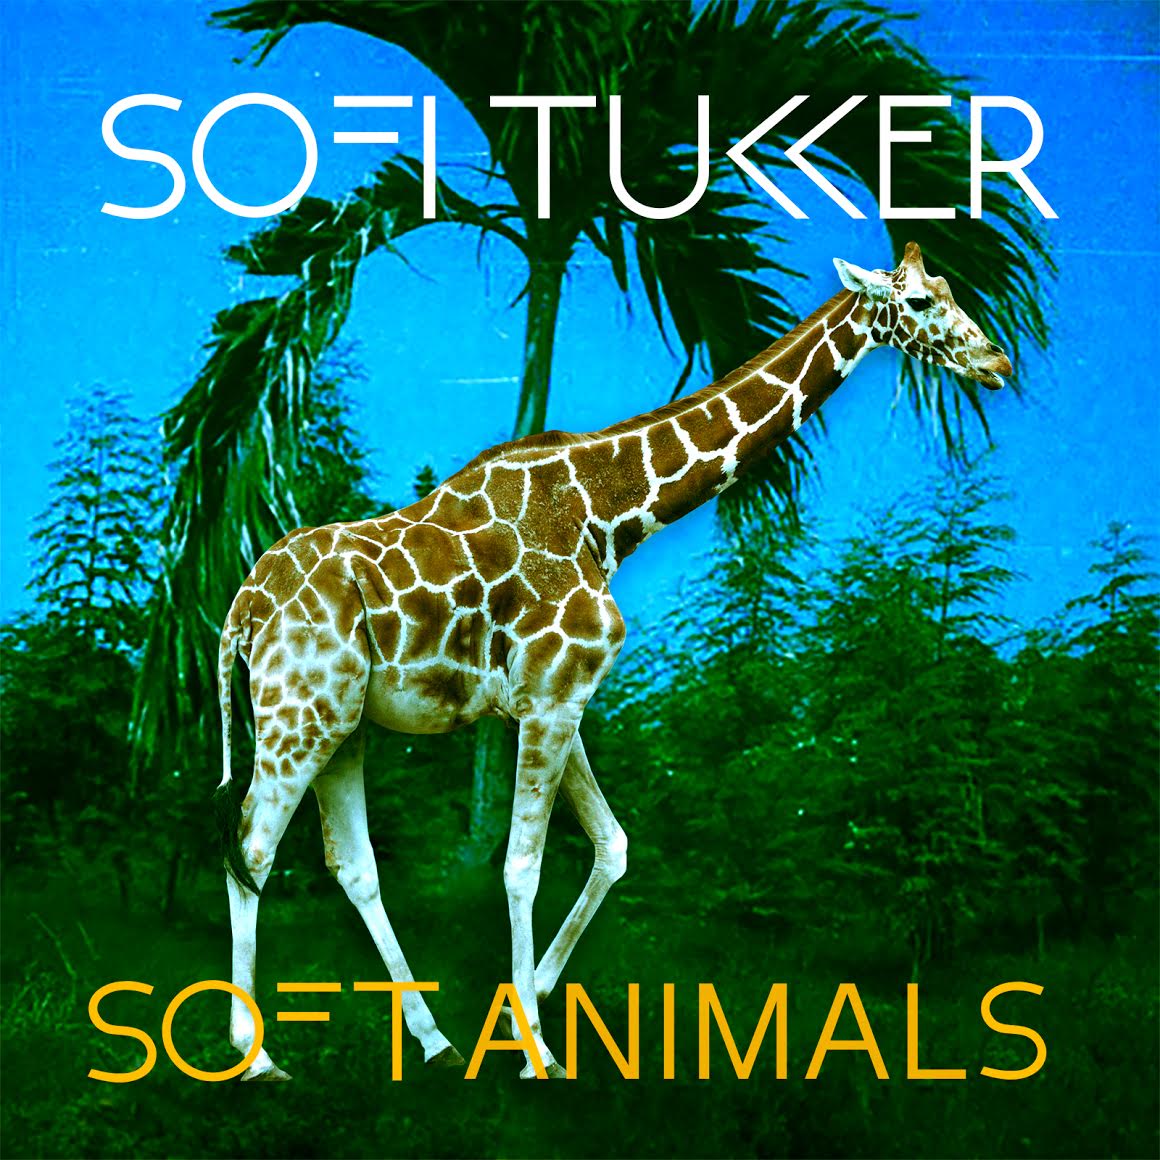 A Day In The Life of... SOFI TUKKER